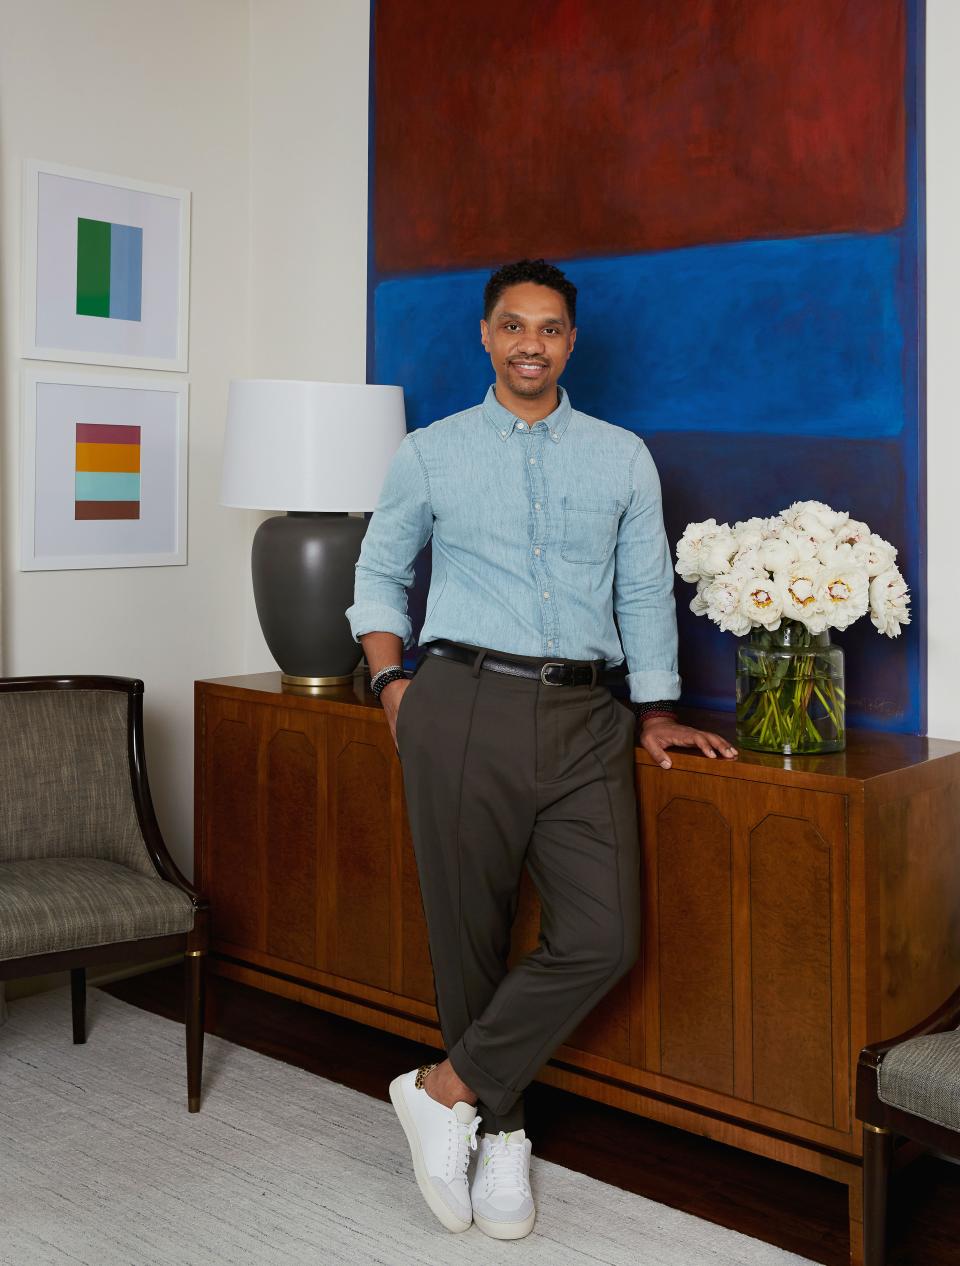 Risdon poses in his living room next to a console table he purchased at Kamelot Auctions in Philadelphia. The large canvas work beside him is by Jaime Karf; the smaller framed acrylics behind him are by William Radawec. Fox Mill Lighting & Supply Co. produced the table lamp.